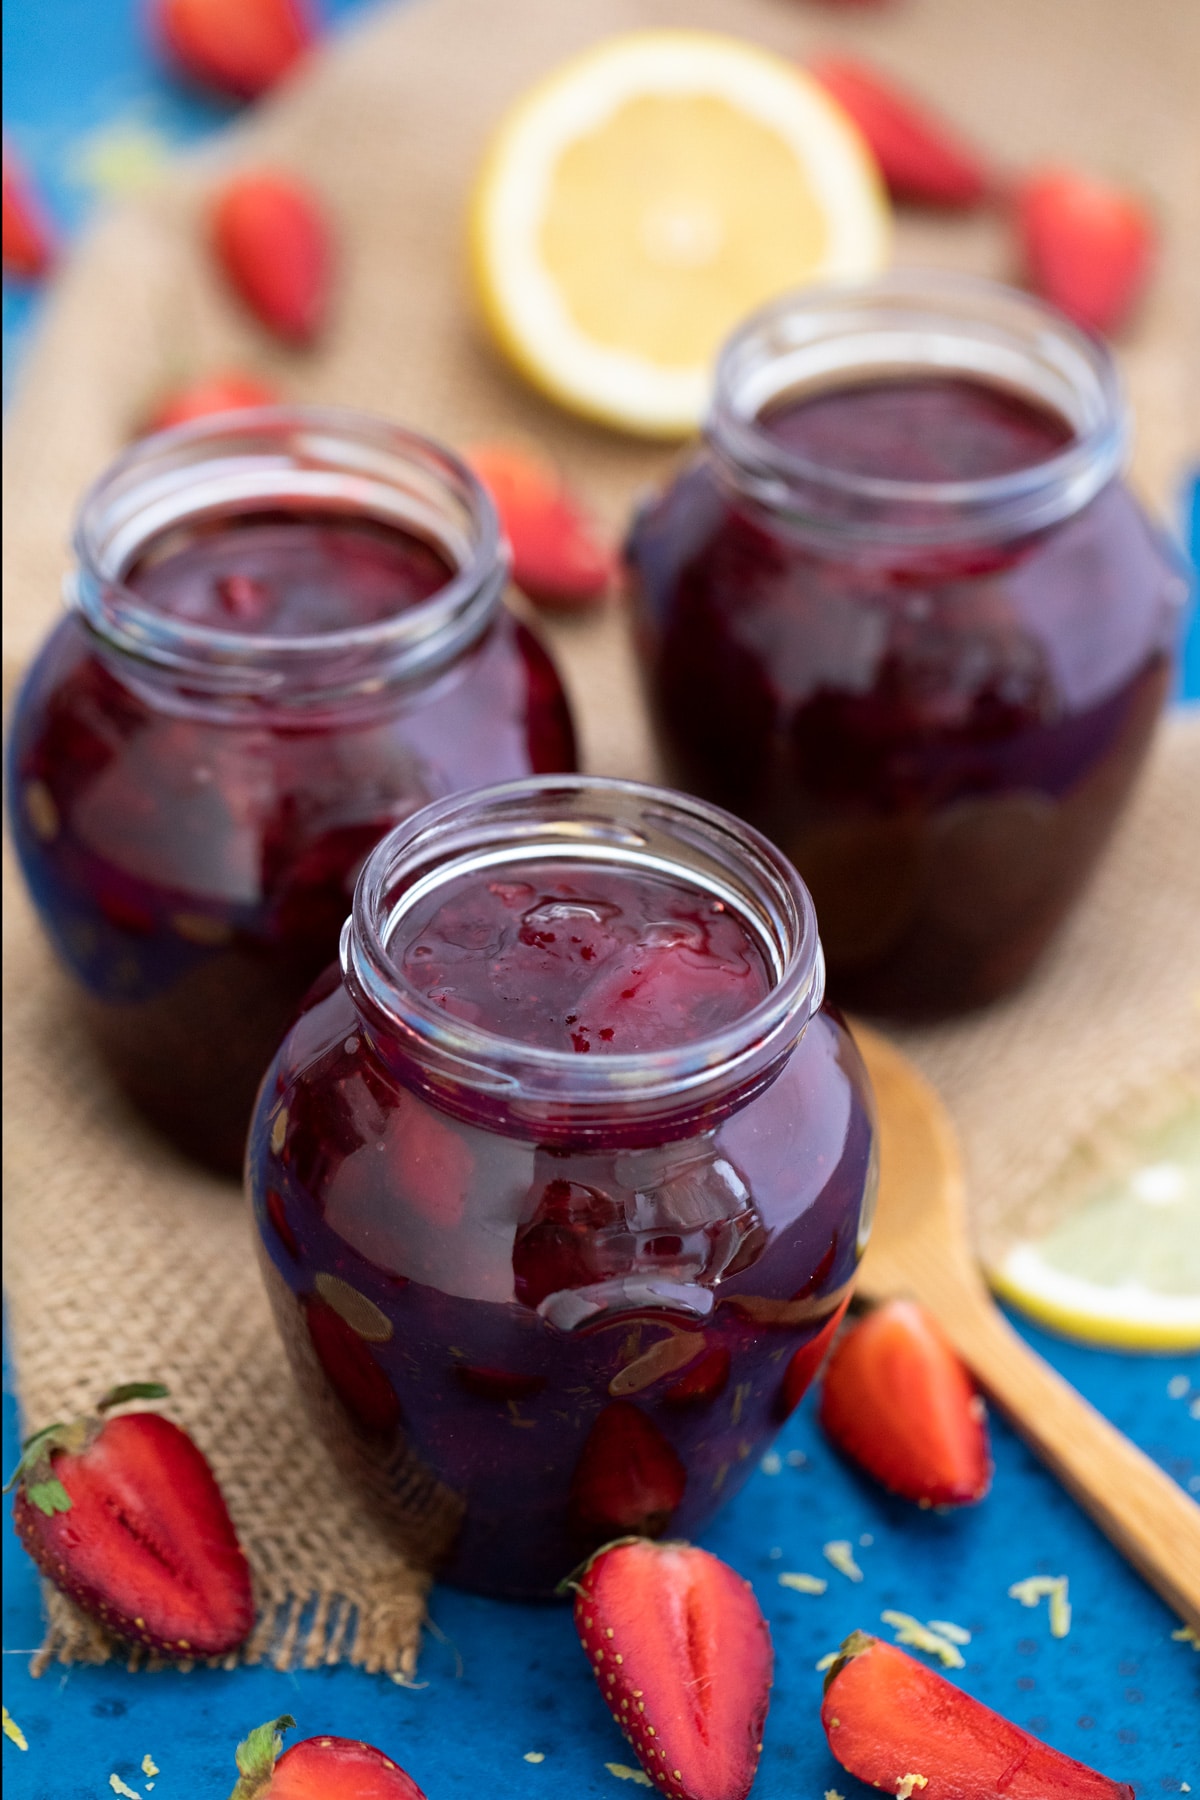 Three jars of jam sitting on blue and burlap napkin with sliced berries on table